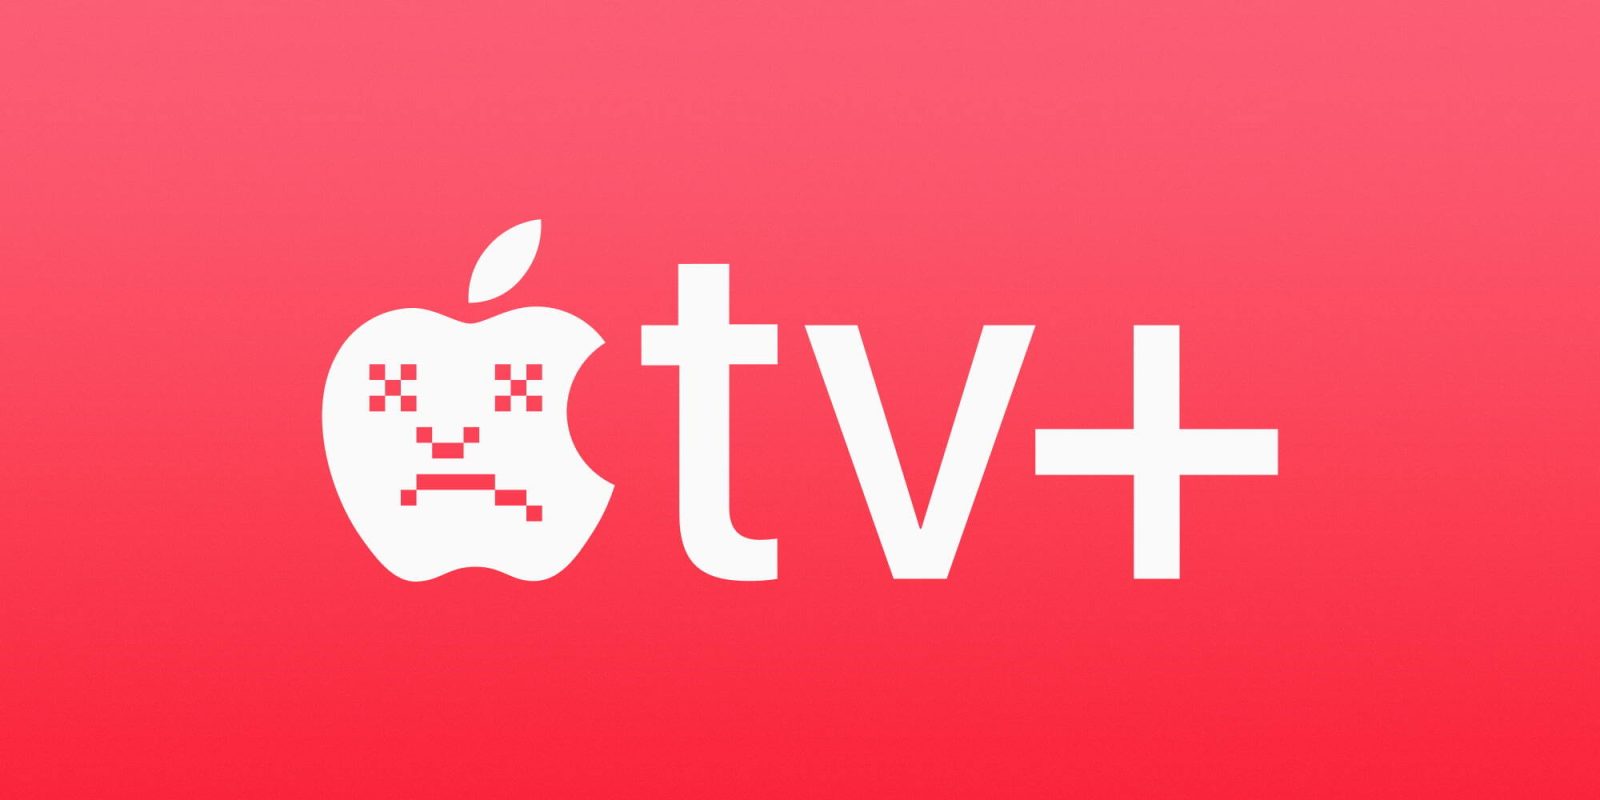 Apple TV+ currently down for some users - 9to5Mac